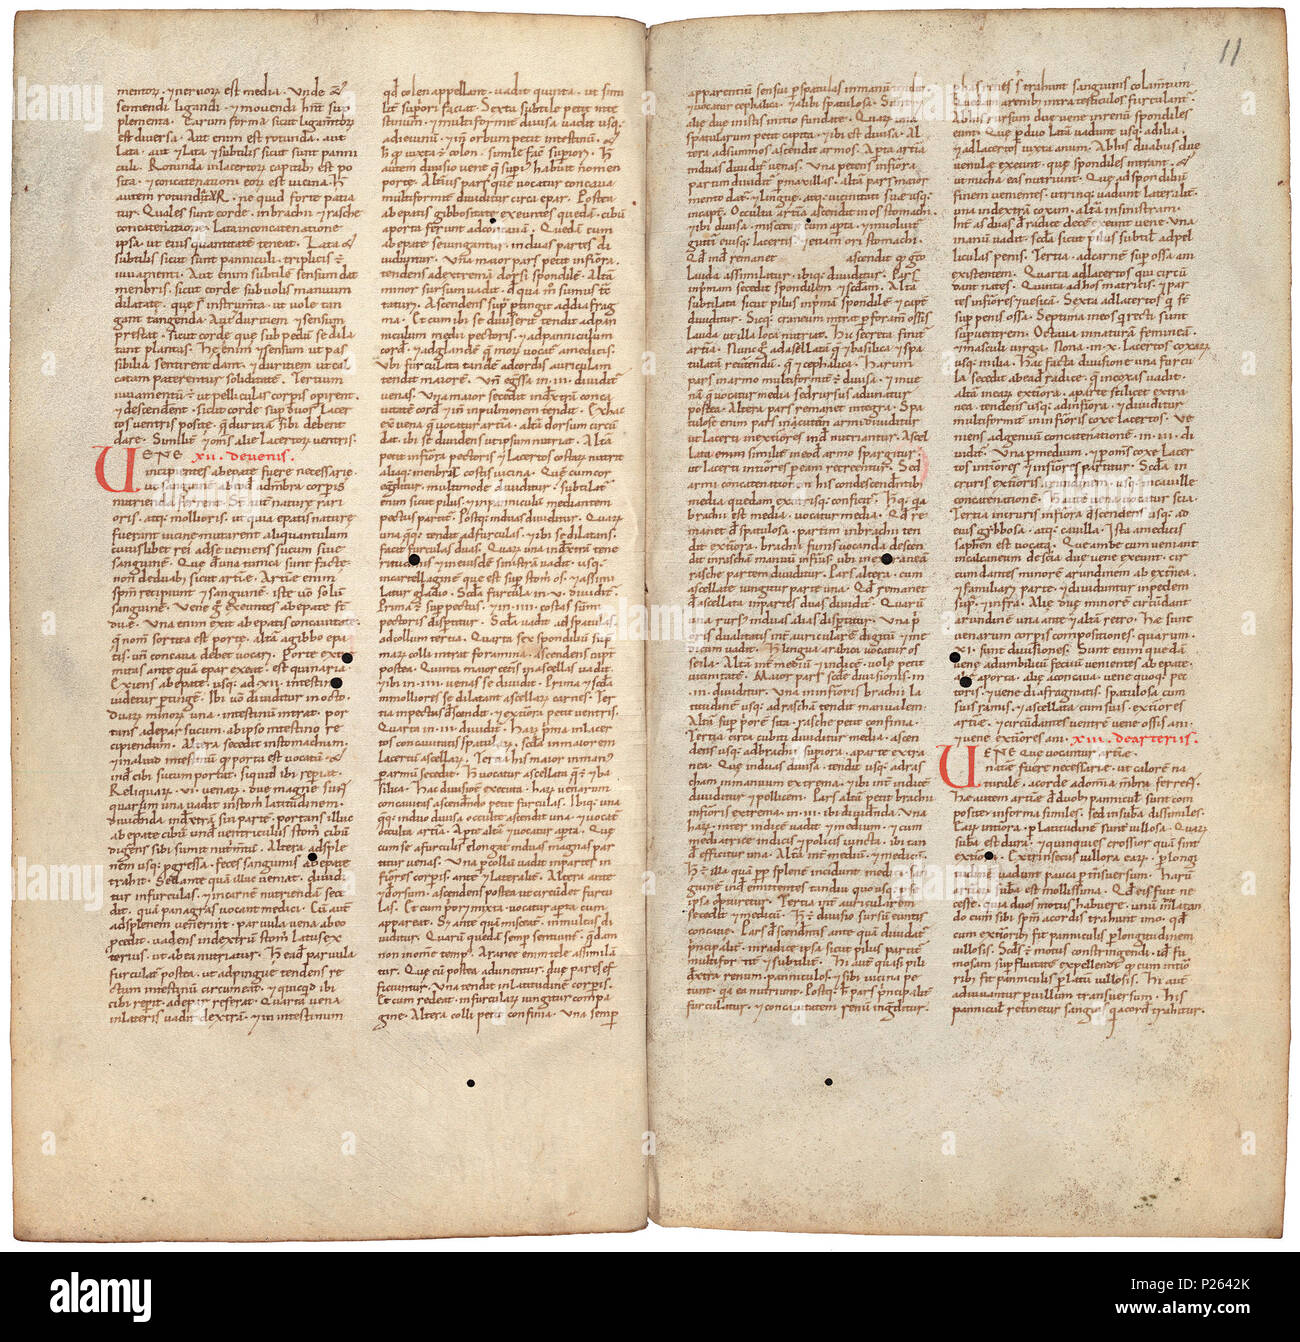 . Pantegni pars prima theorica (lib. I-X) - folios 010v (left) and 011r (right)  .  Lefthand side folio 010v; righthand side folio 011r from an 11th century copy of the Liber pantegni. This is the earliest known copy (prior to 1086) of the Liber pantegni, made at Monte Cassino under the supervision of Constantine the African. It is dedicated to Abbot Desiderius of Monte Cassino (1027-1087), before he became Pope Victor III. Read backgroud information in Dutch and in English. . Constantine the African (ca. 1010-1098/9) 175 Liber pantegni - KB 73 J 6 - folios 010v (left) and 011r (right) Stock Photo